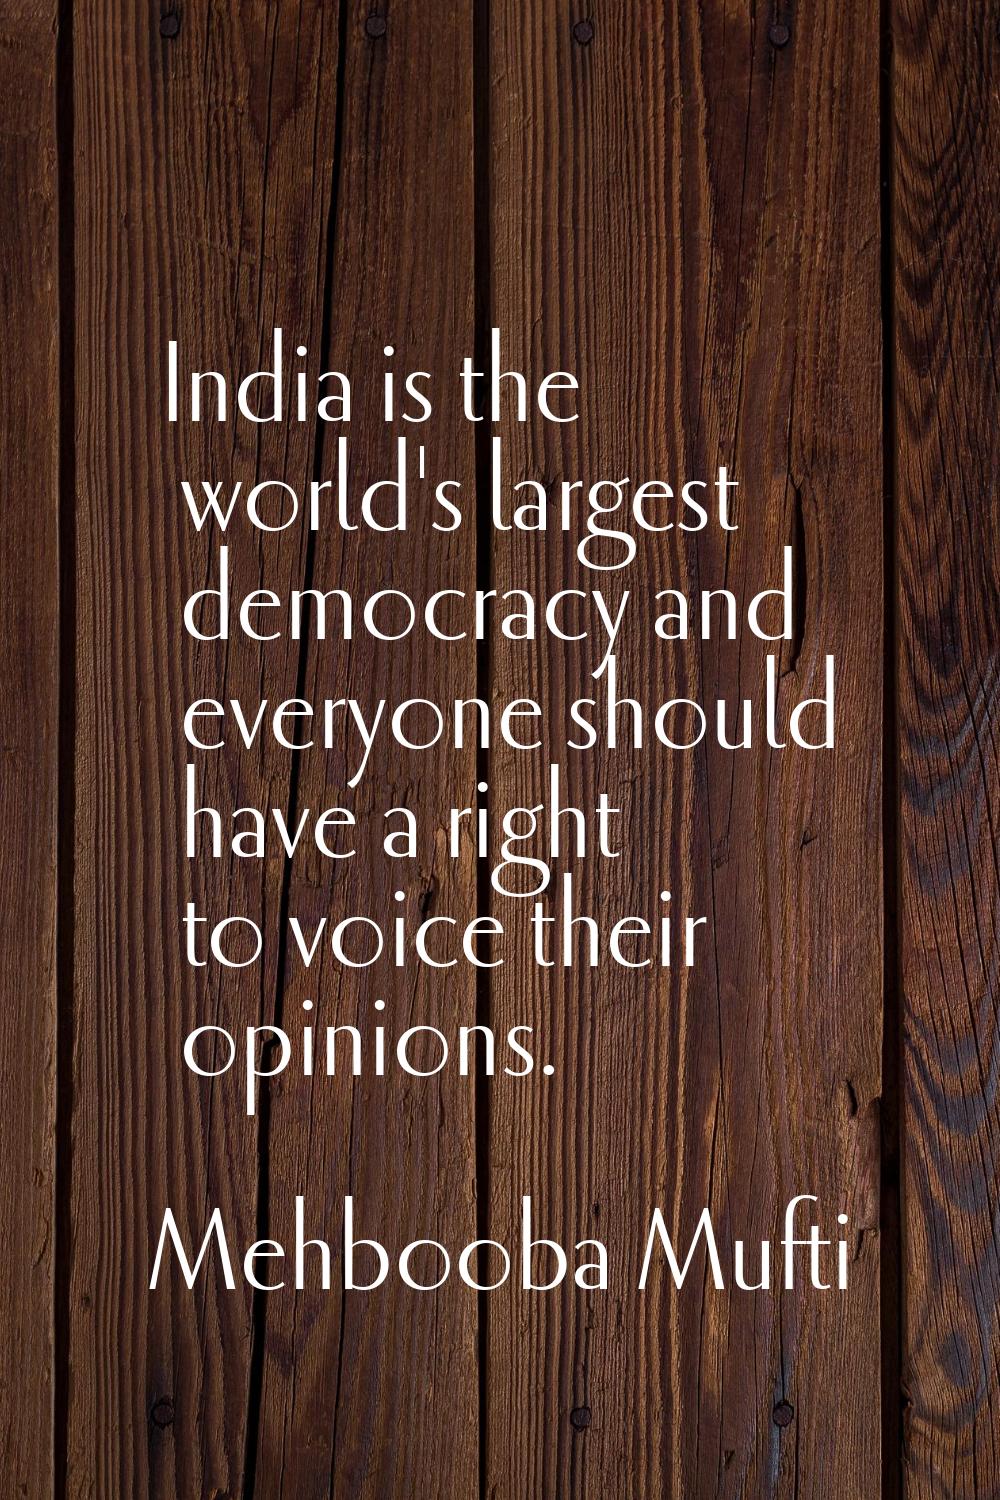 India is the world's largest democracy and everyone should have a right to voice their opinions.